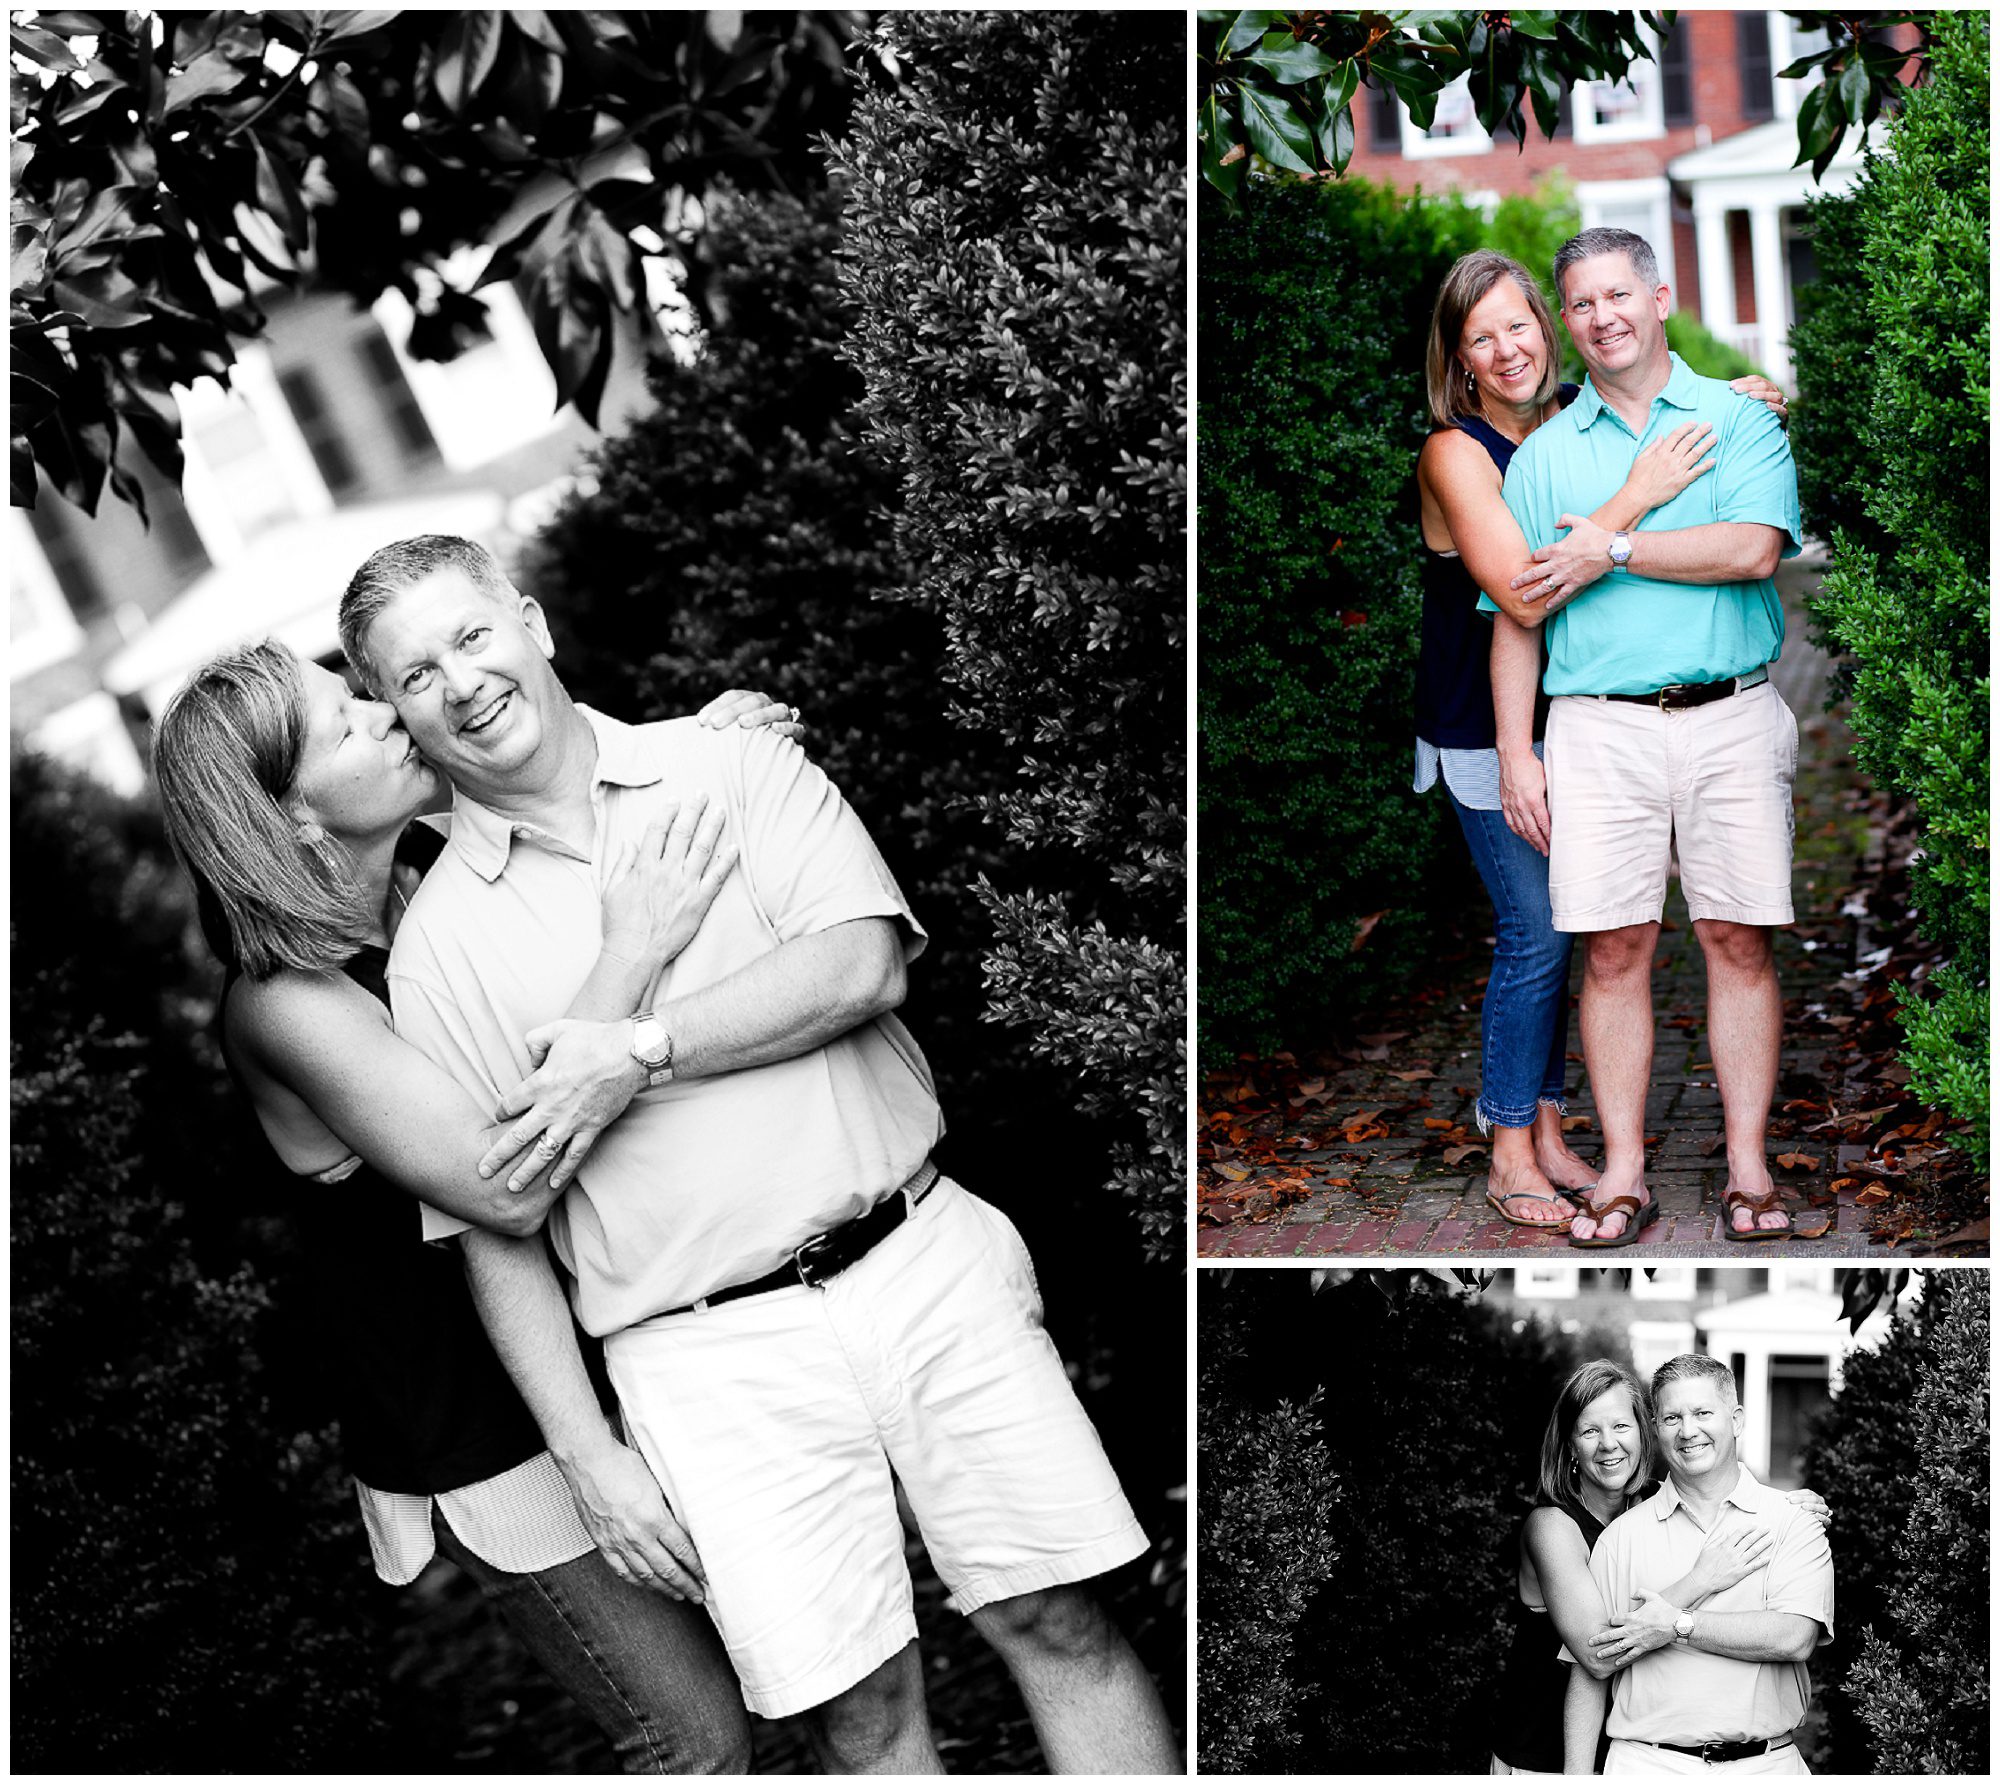 charlottesville family portrait photographer pictures fluvanna sisters summertime photography silhouette dog pet summer fun